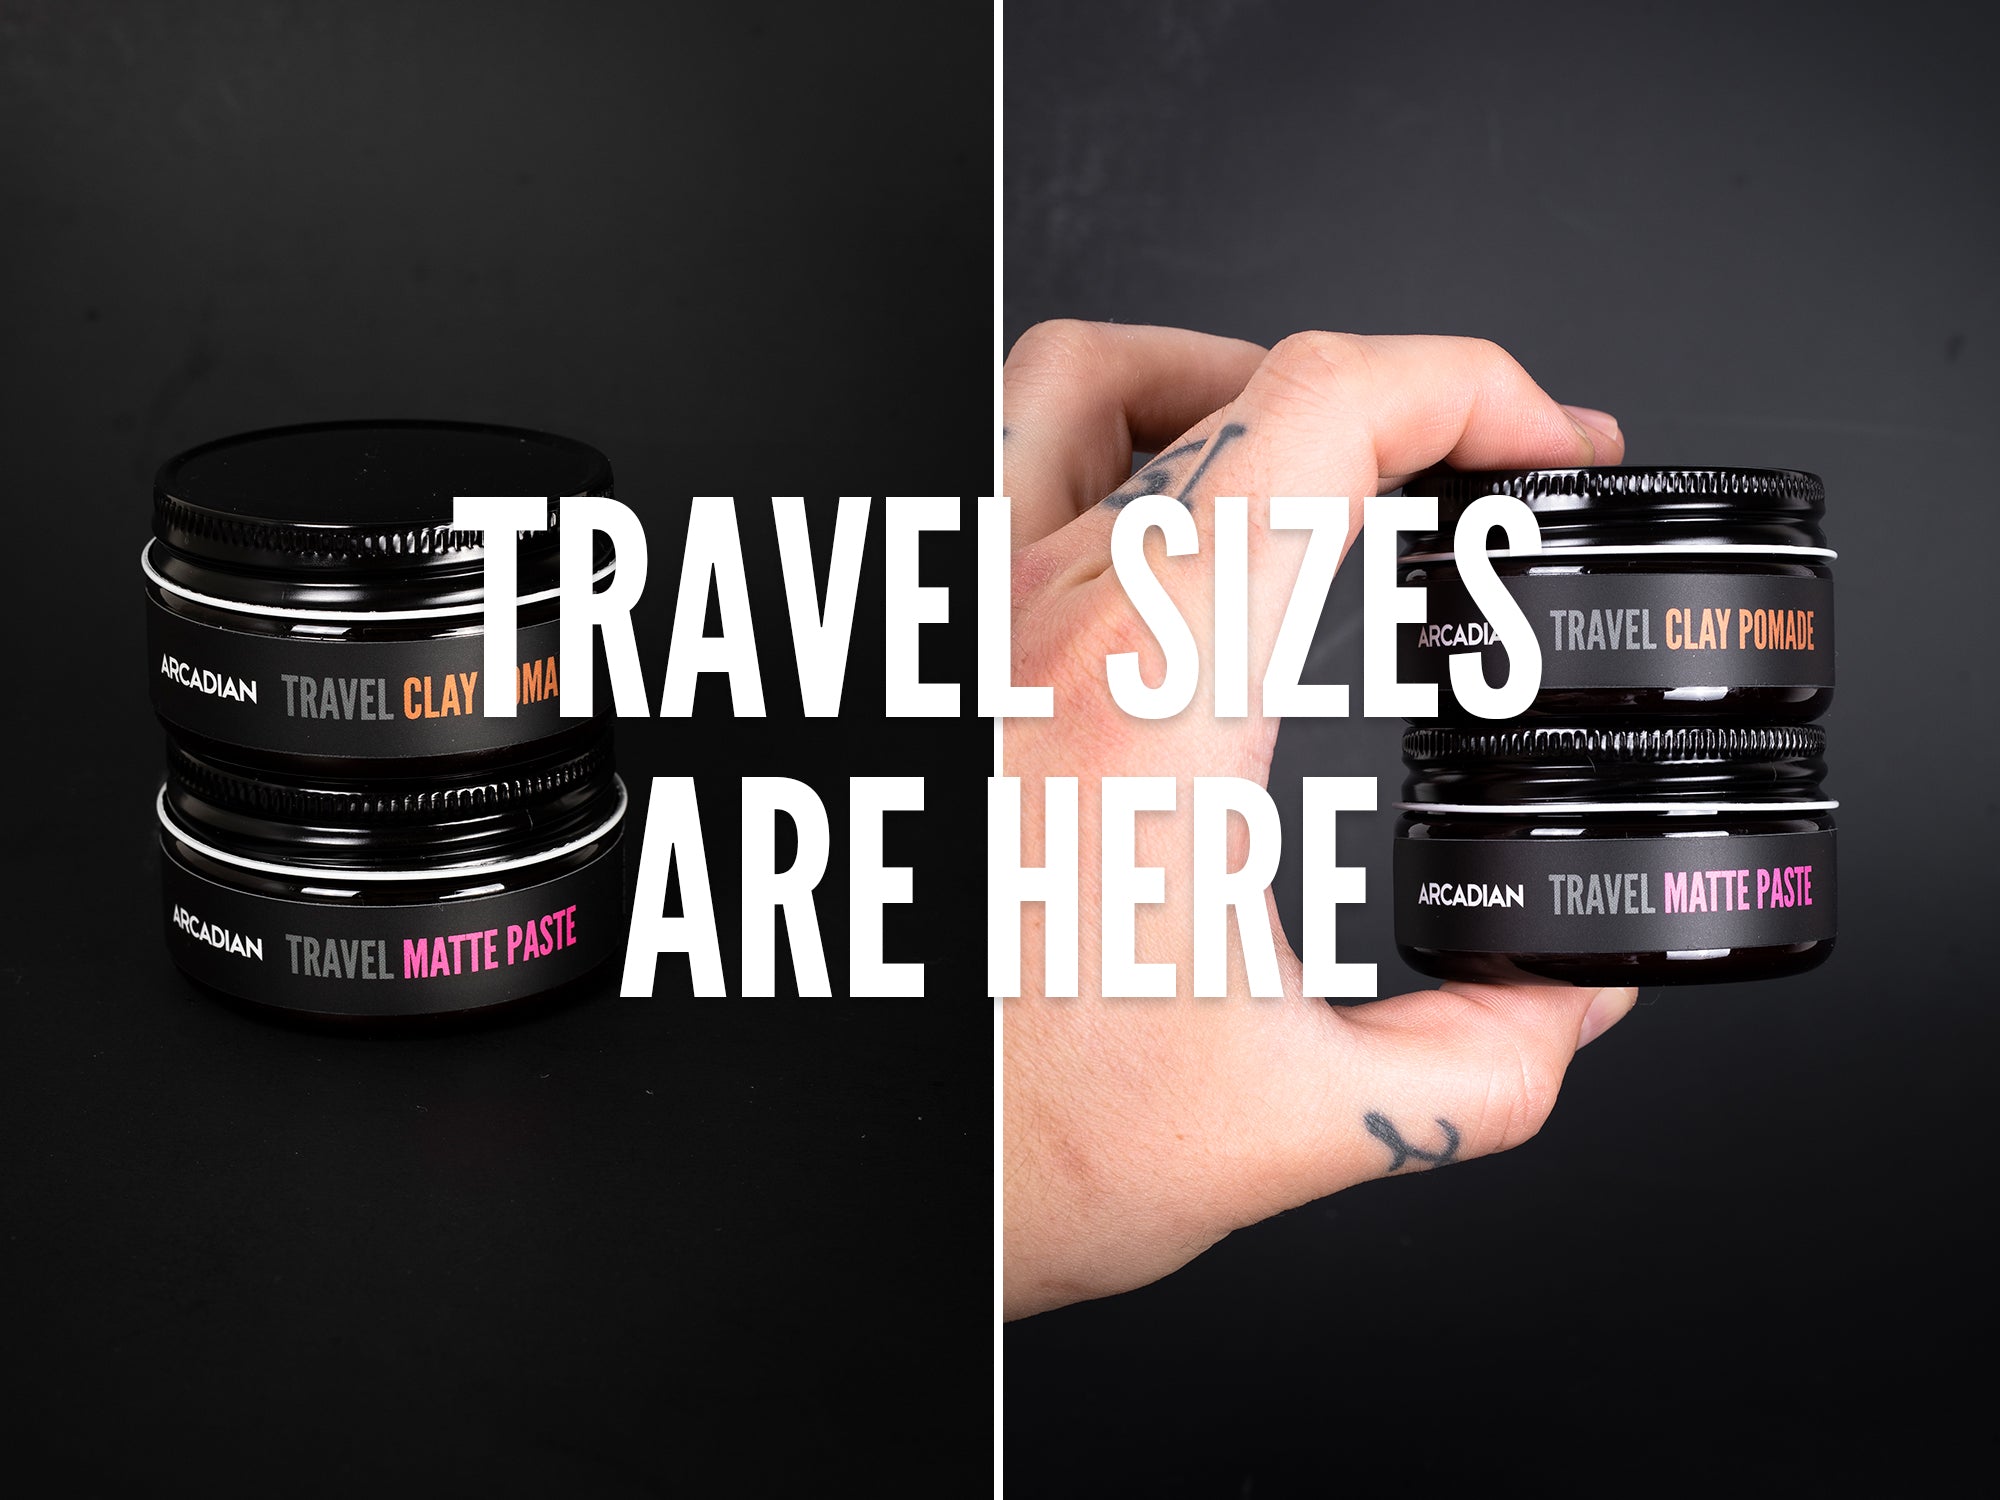 Travel Sized (2oz) Matte Paste & Clay Pomade are here!